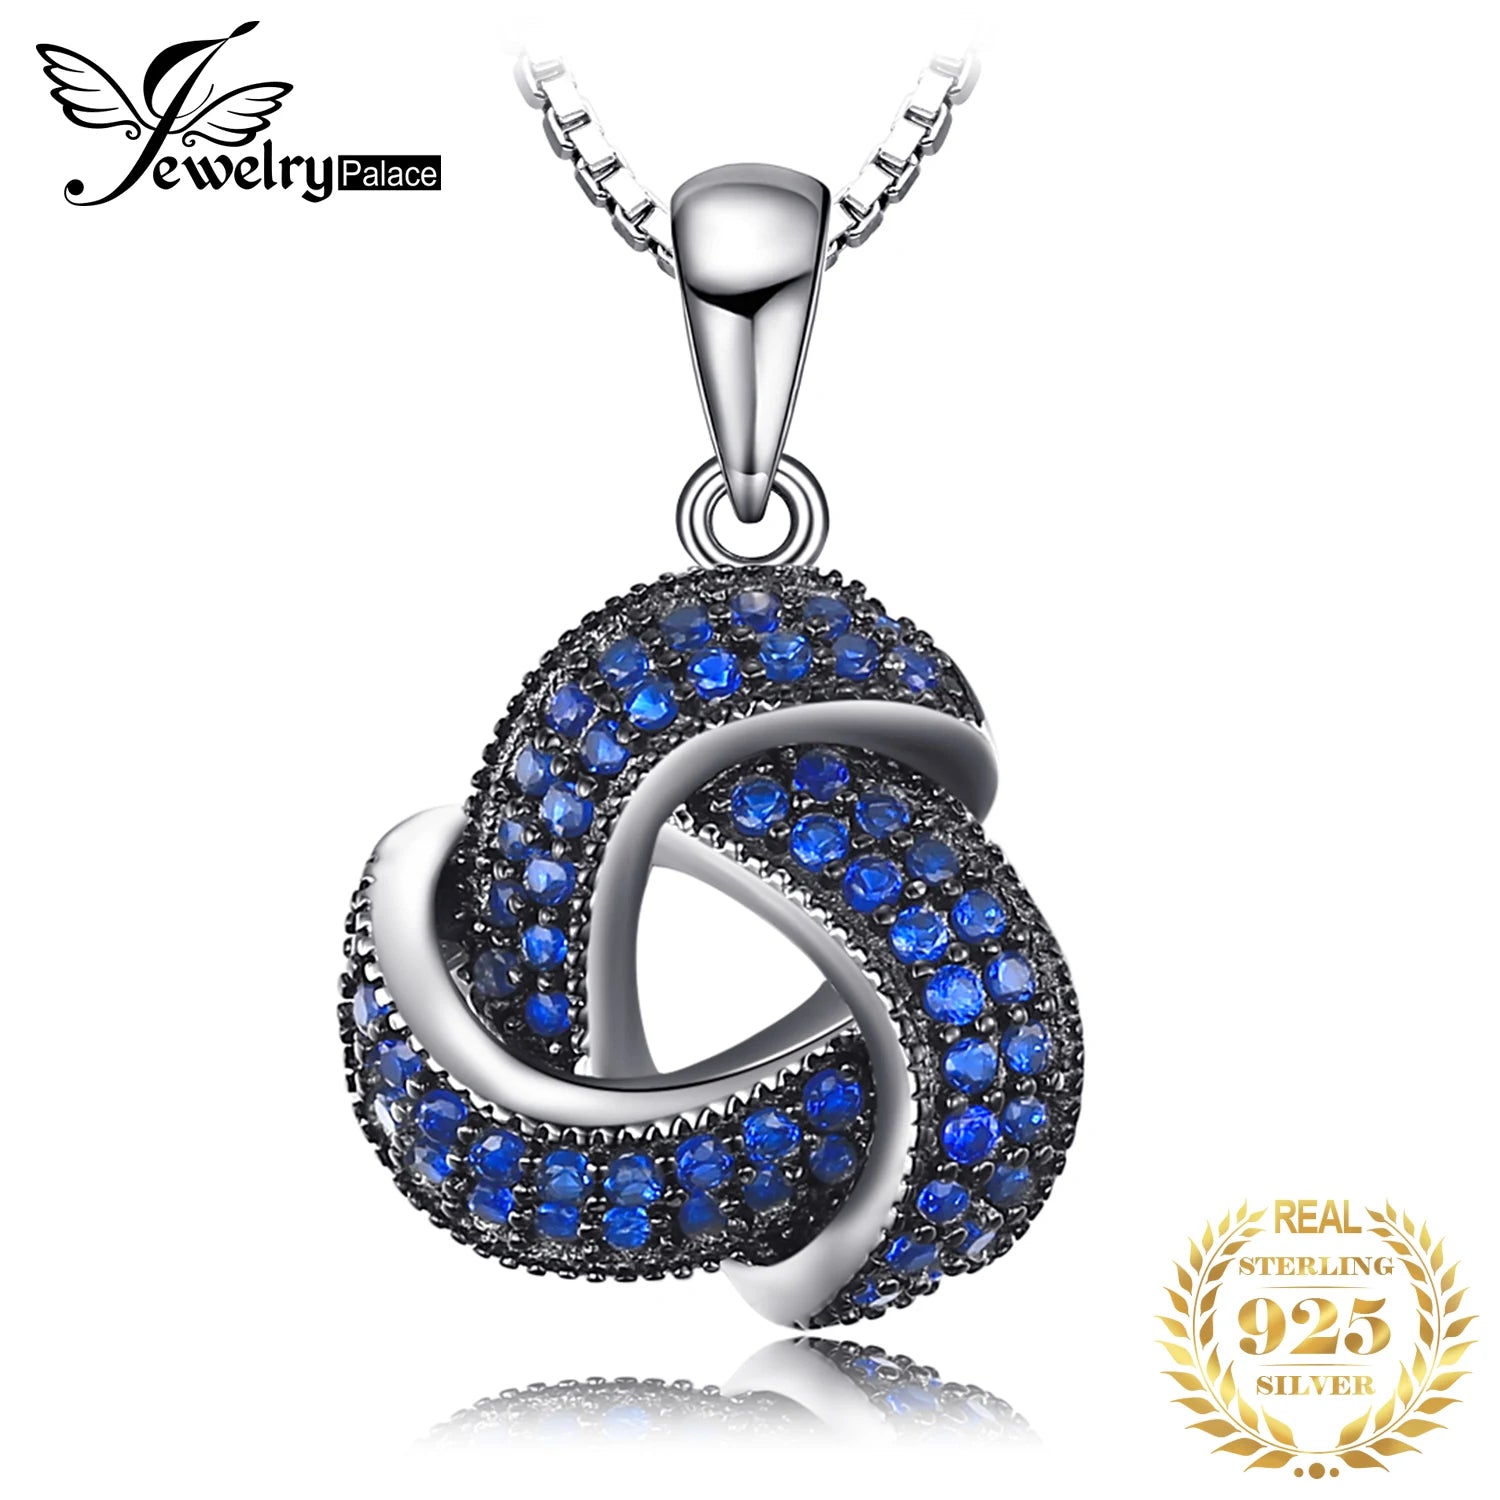 JewelryPalace Flower Knot Created Blue Spinel 925 Sterling Silver Pendant Necklace for Women Fashion Gemstone Choker No Chain Default Title